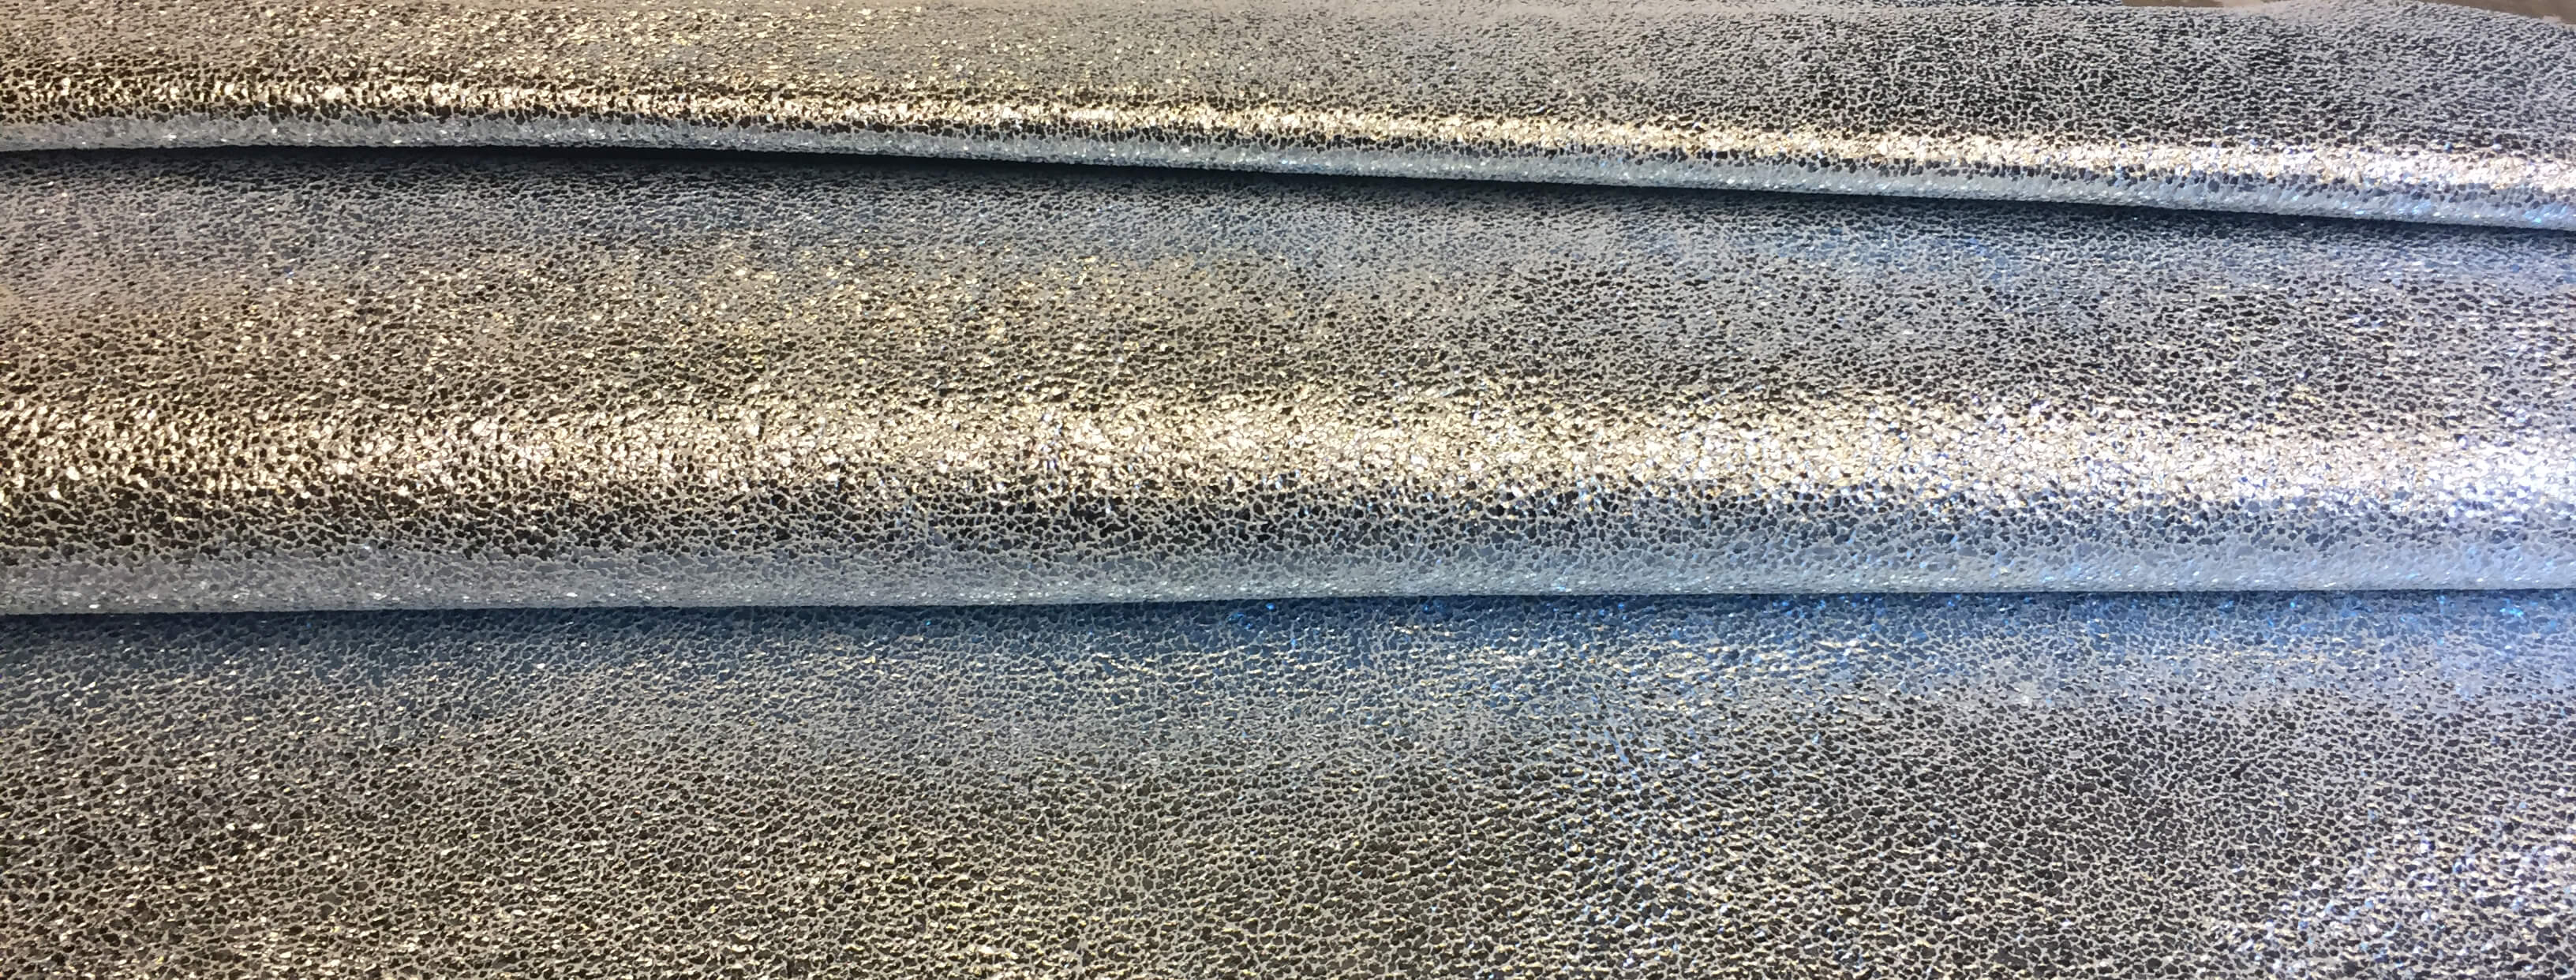 Sparkling Silver Leather Hides